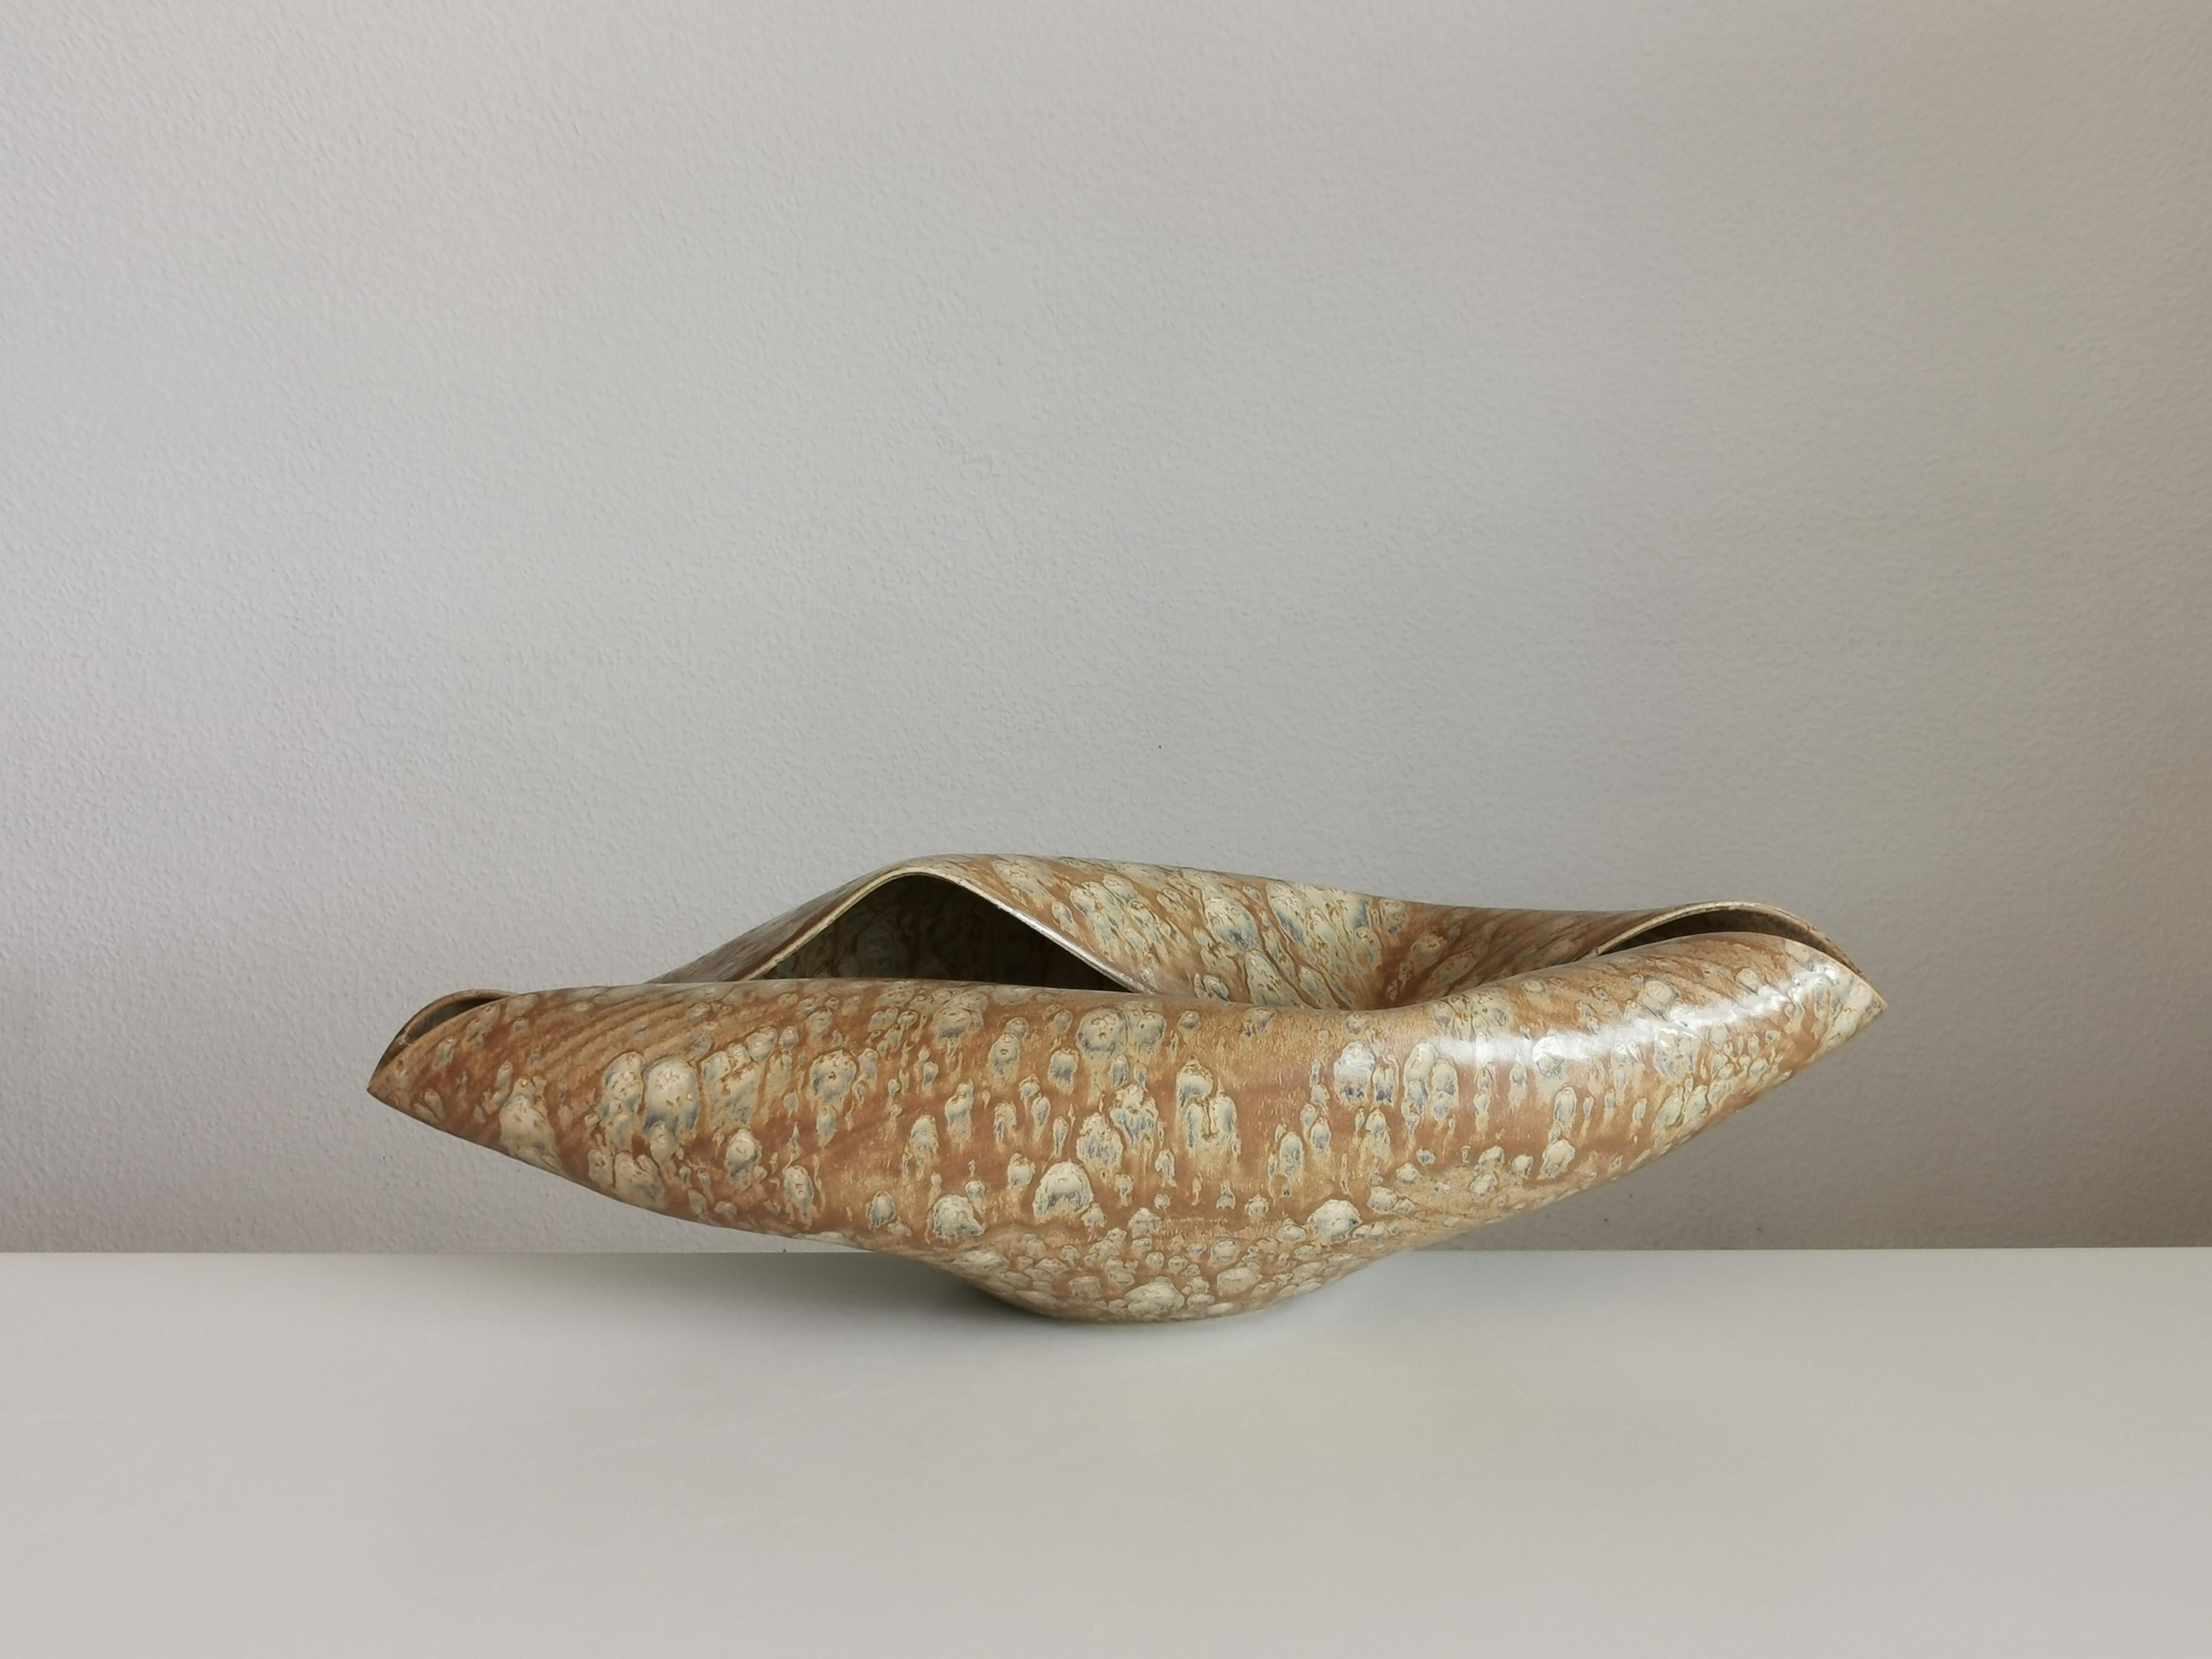 Vessel from ceramic artist Nicholas Arroyave-Portela.

No. 135 Wide undulating open form with a desert dusk glaze (Vessel, Interior sculpture, not suitable for holding water)

White St.Thomas clay, stoneware glazes, multi fired to cone 6 (1223